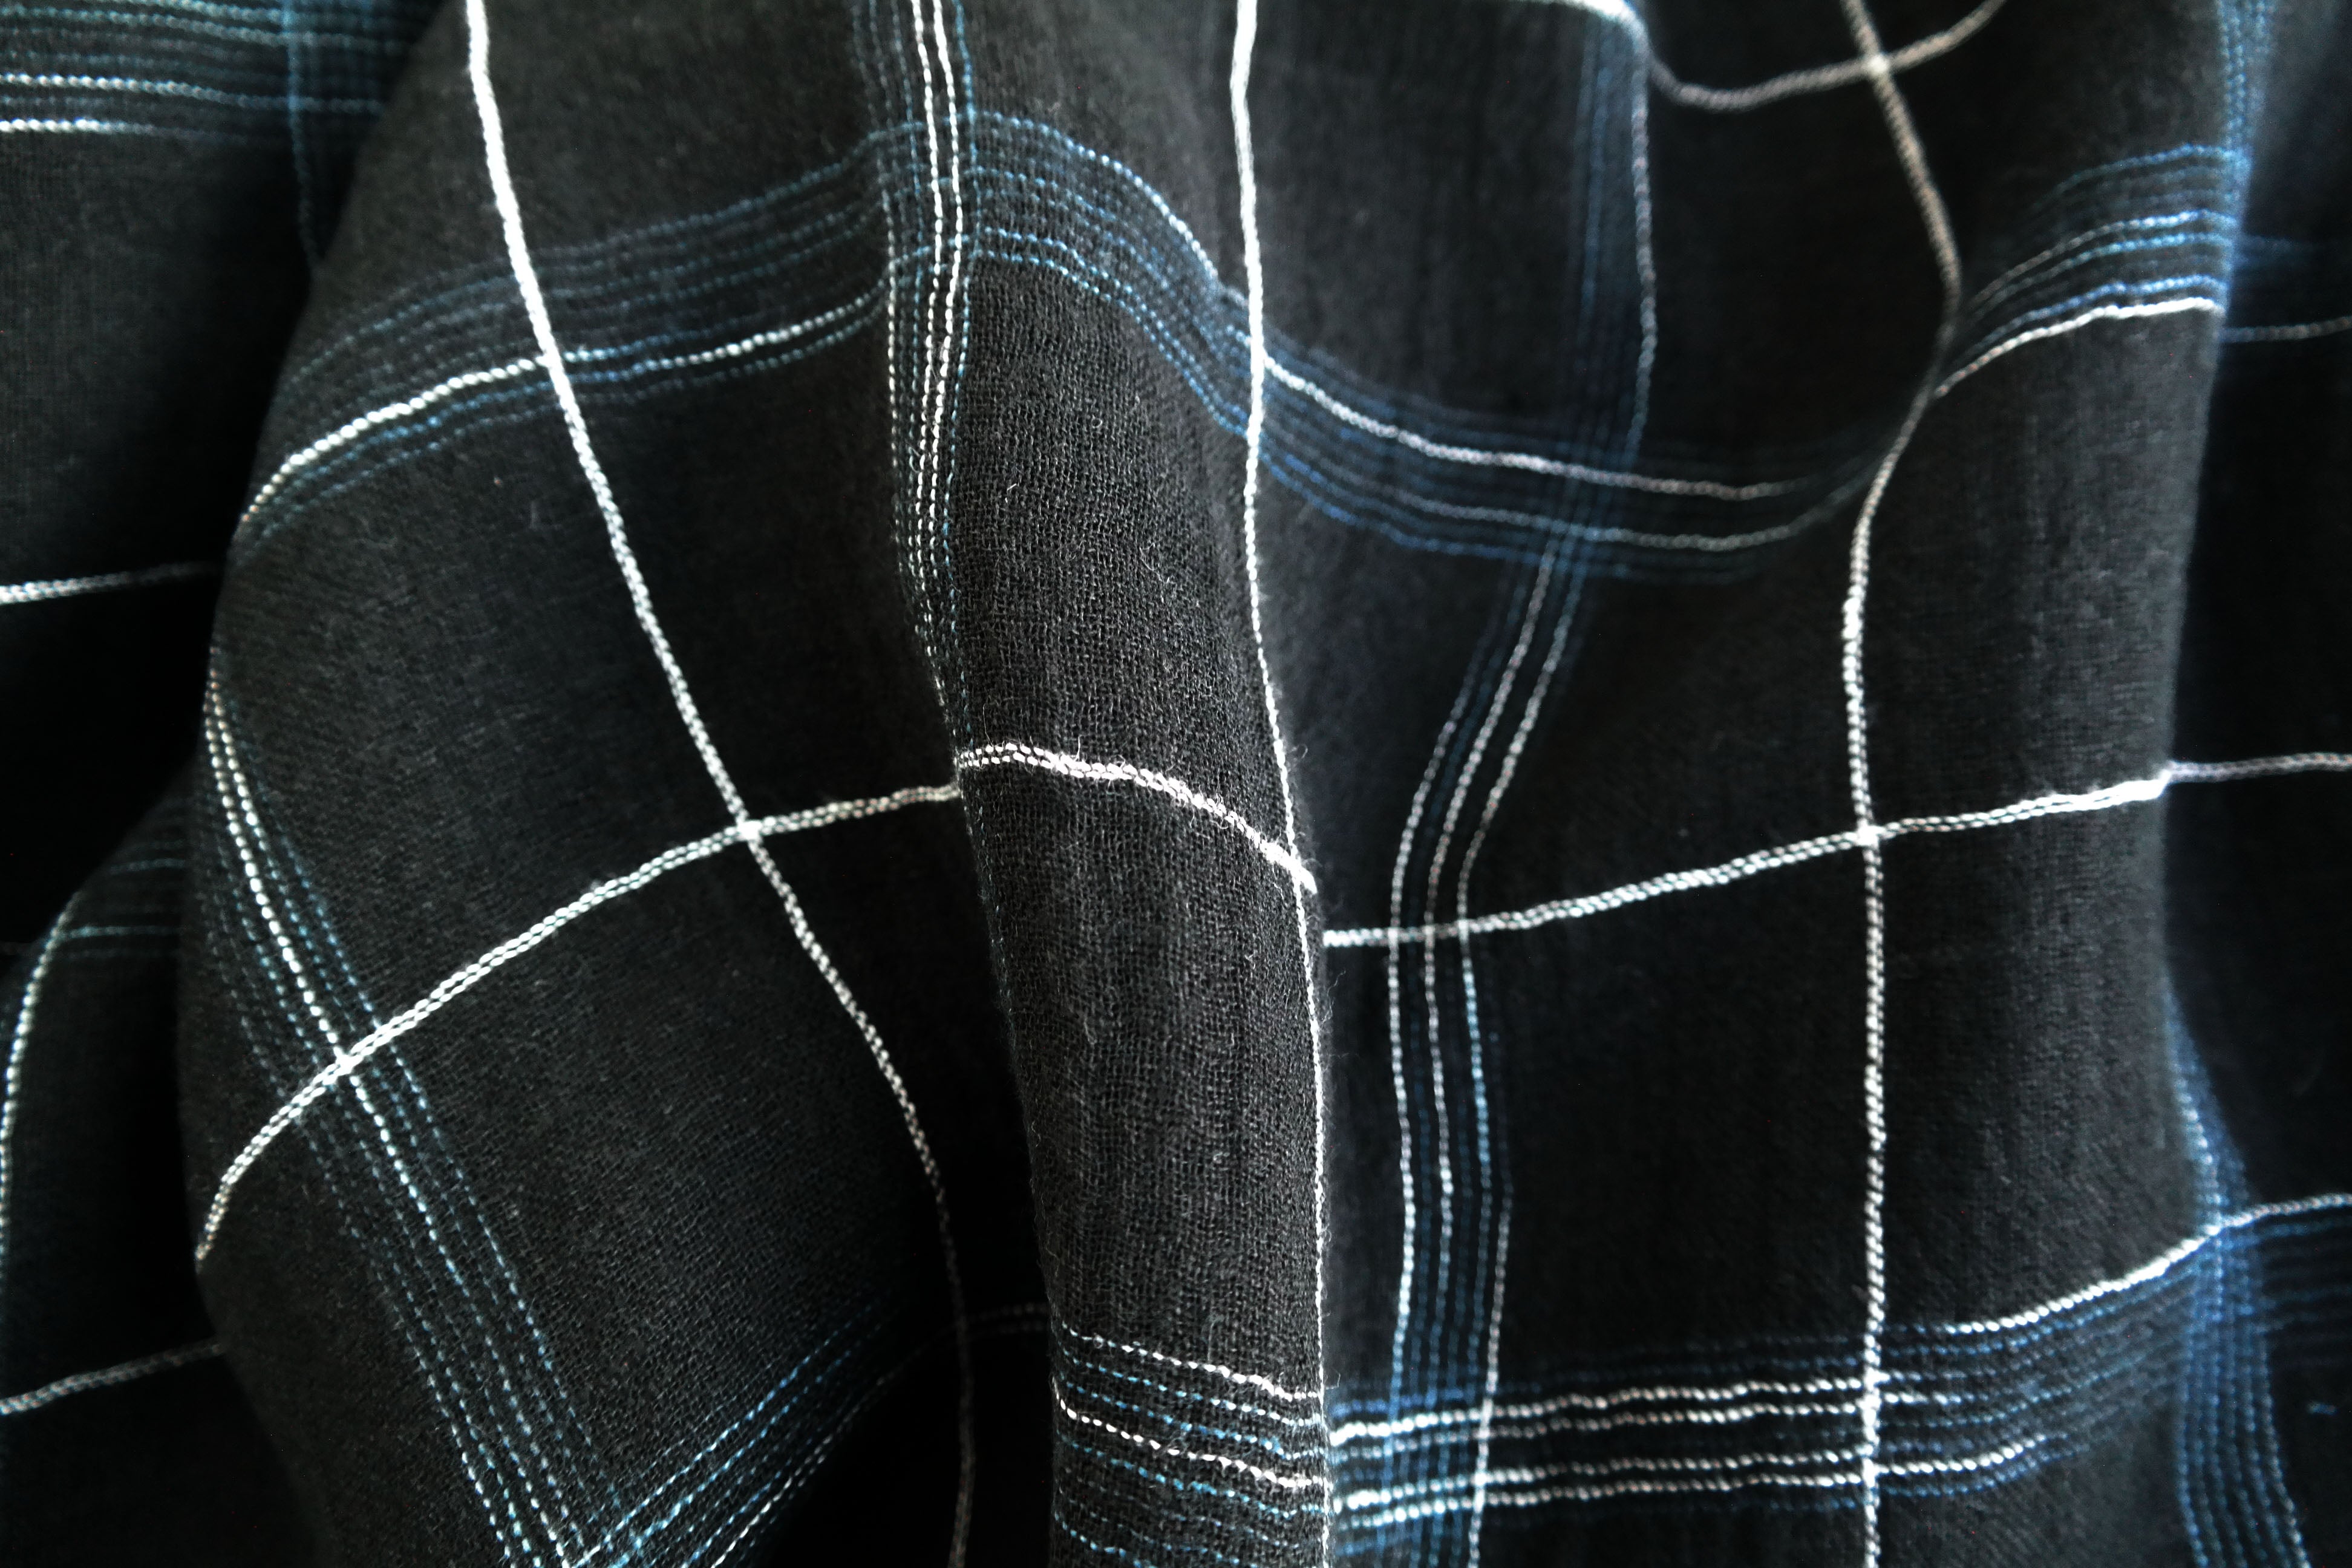 High Twisted Linen Fabric with Wrinkle Effect -Spaced Dyed Windowpane Check 6645 6688 - The Linen Lab - BLACK 6645